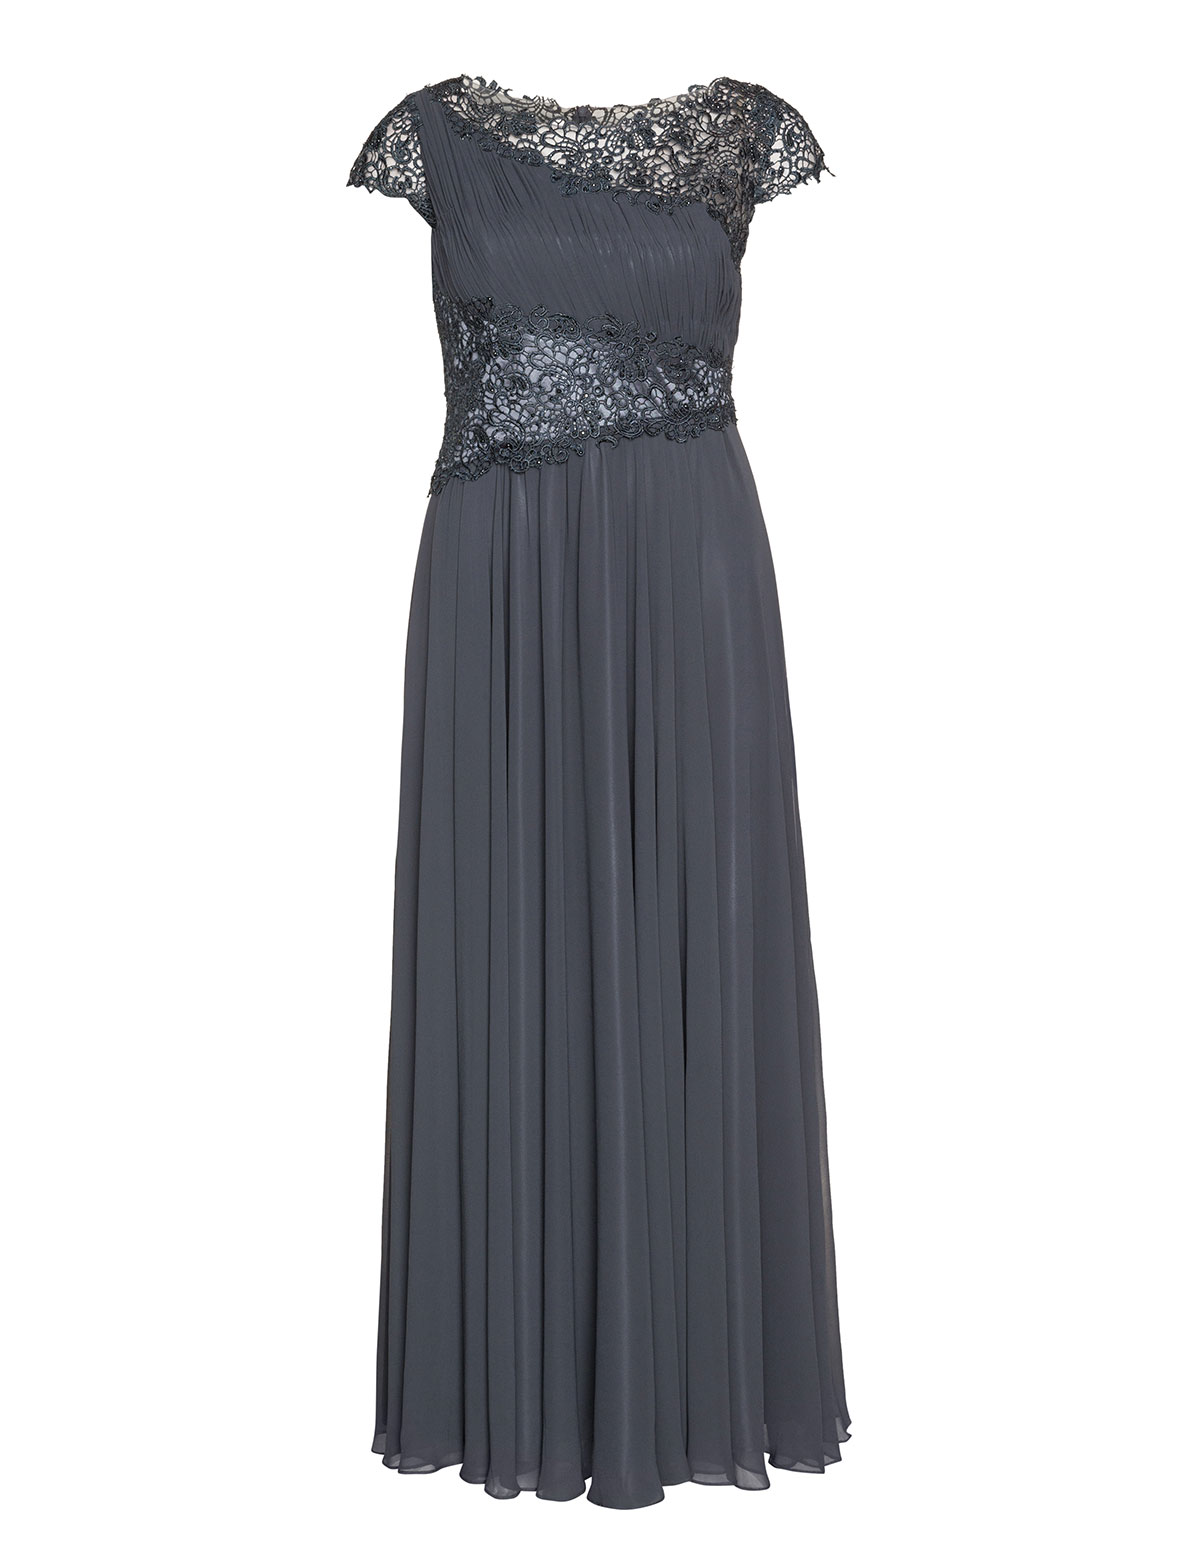 Asymmetric lace and chiffon evening gown by
Viviana